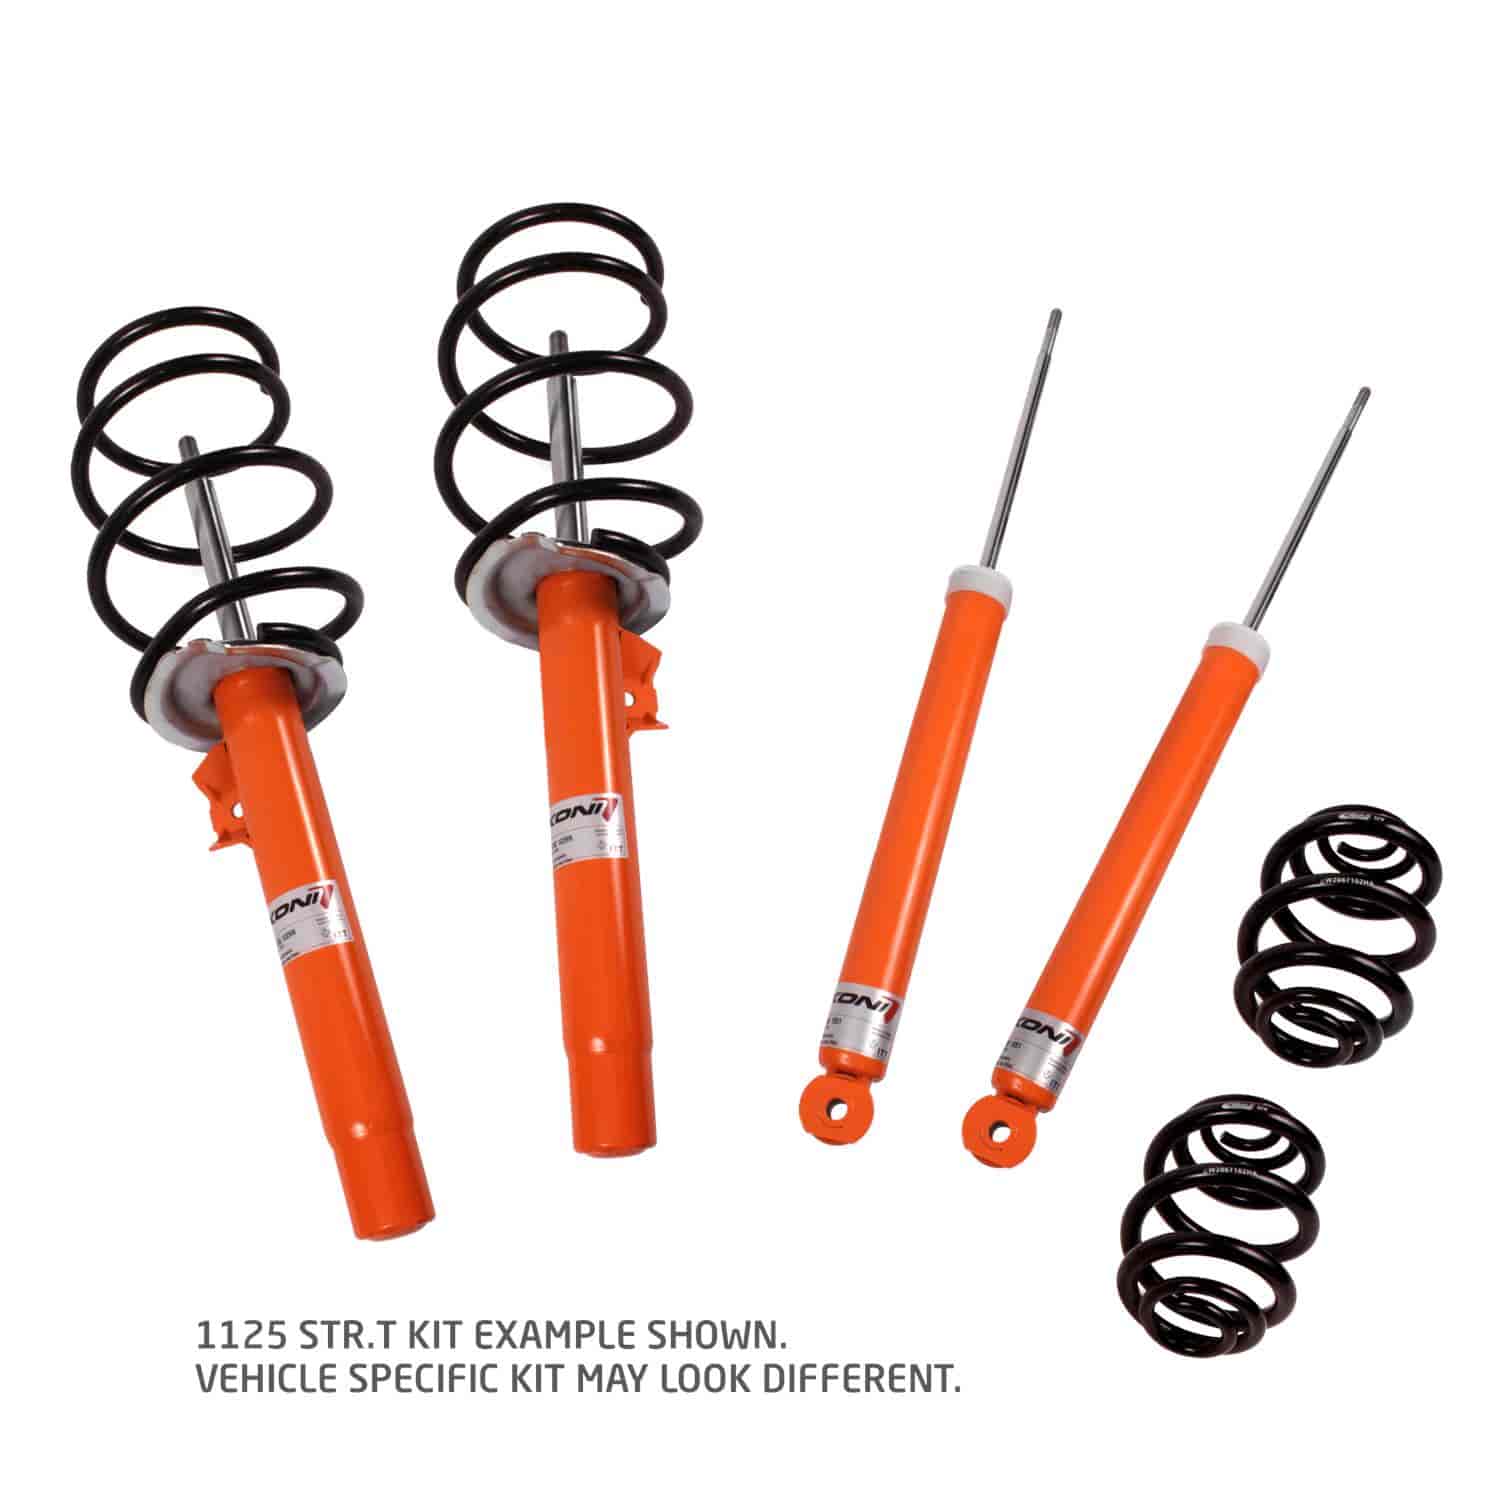 1125 STR.T Kit Orange 1994-1998 Volkswagen Golf III VR6 Front lowers approx. 1.3 inches.